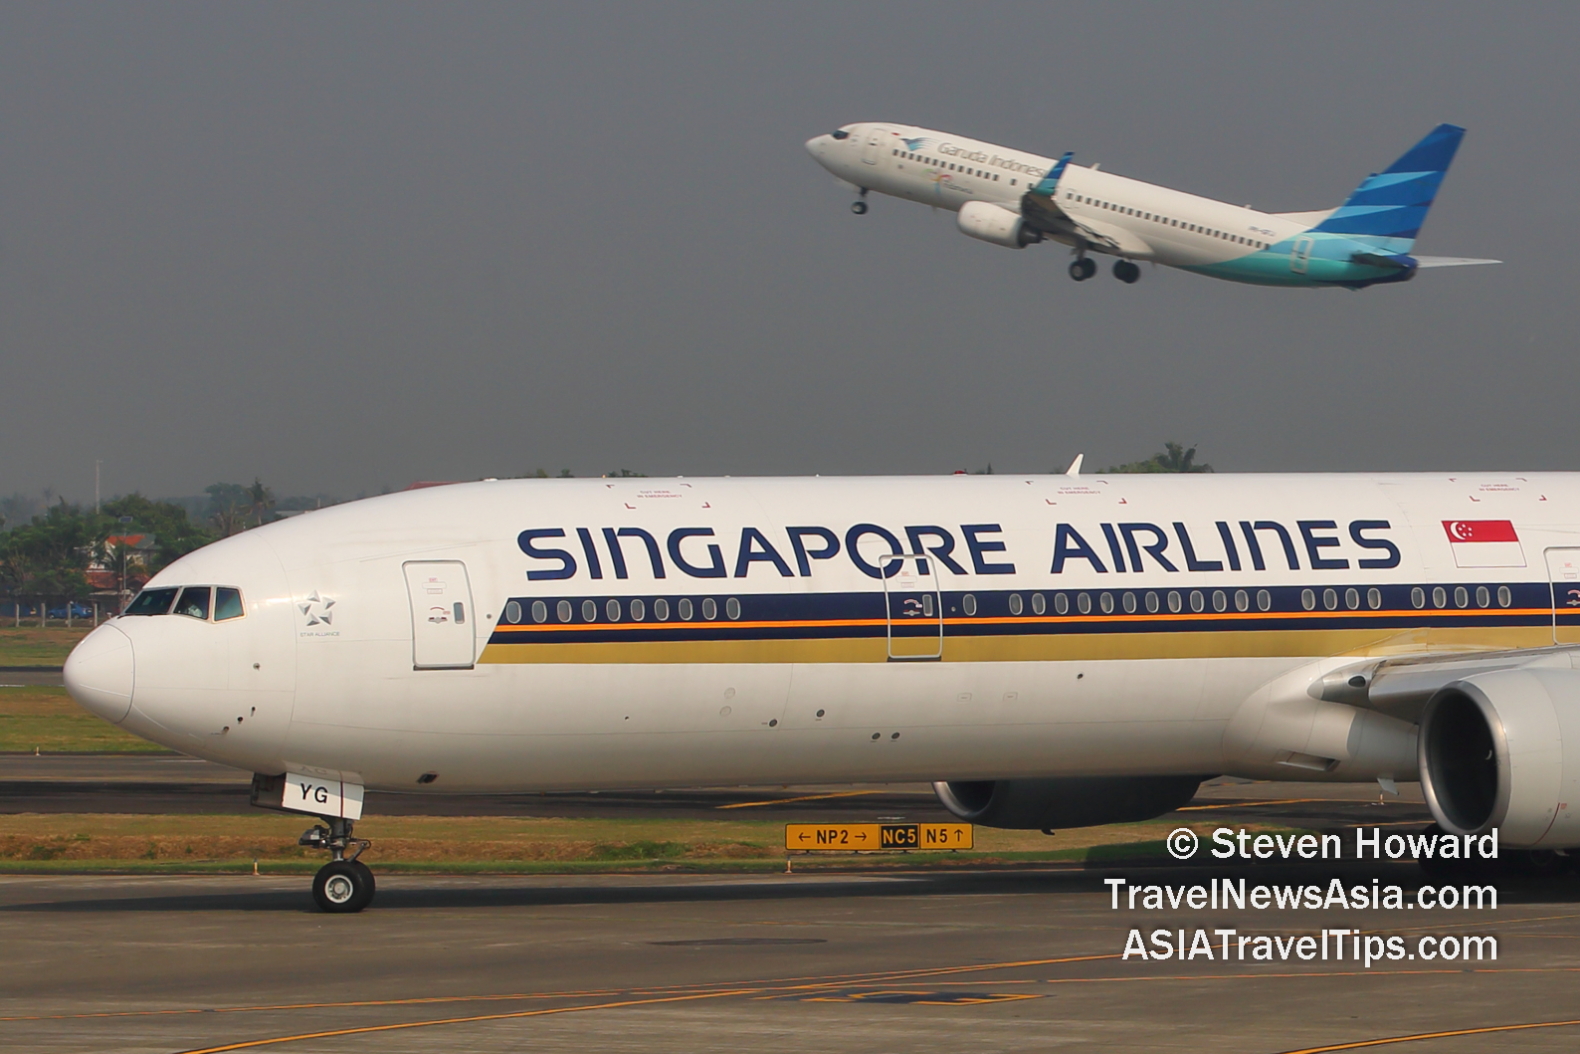 SIA B777 reg: 9V-SYG in the foreground with Garuda B737 taking off in the background. Picture by Steven Howard of TravelNewsAsia.com Click to enlarge.